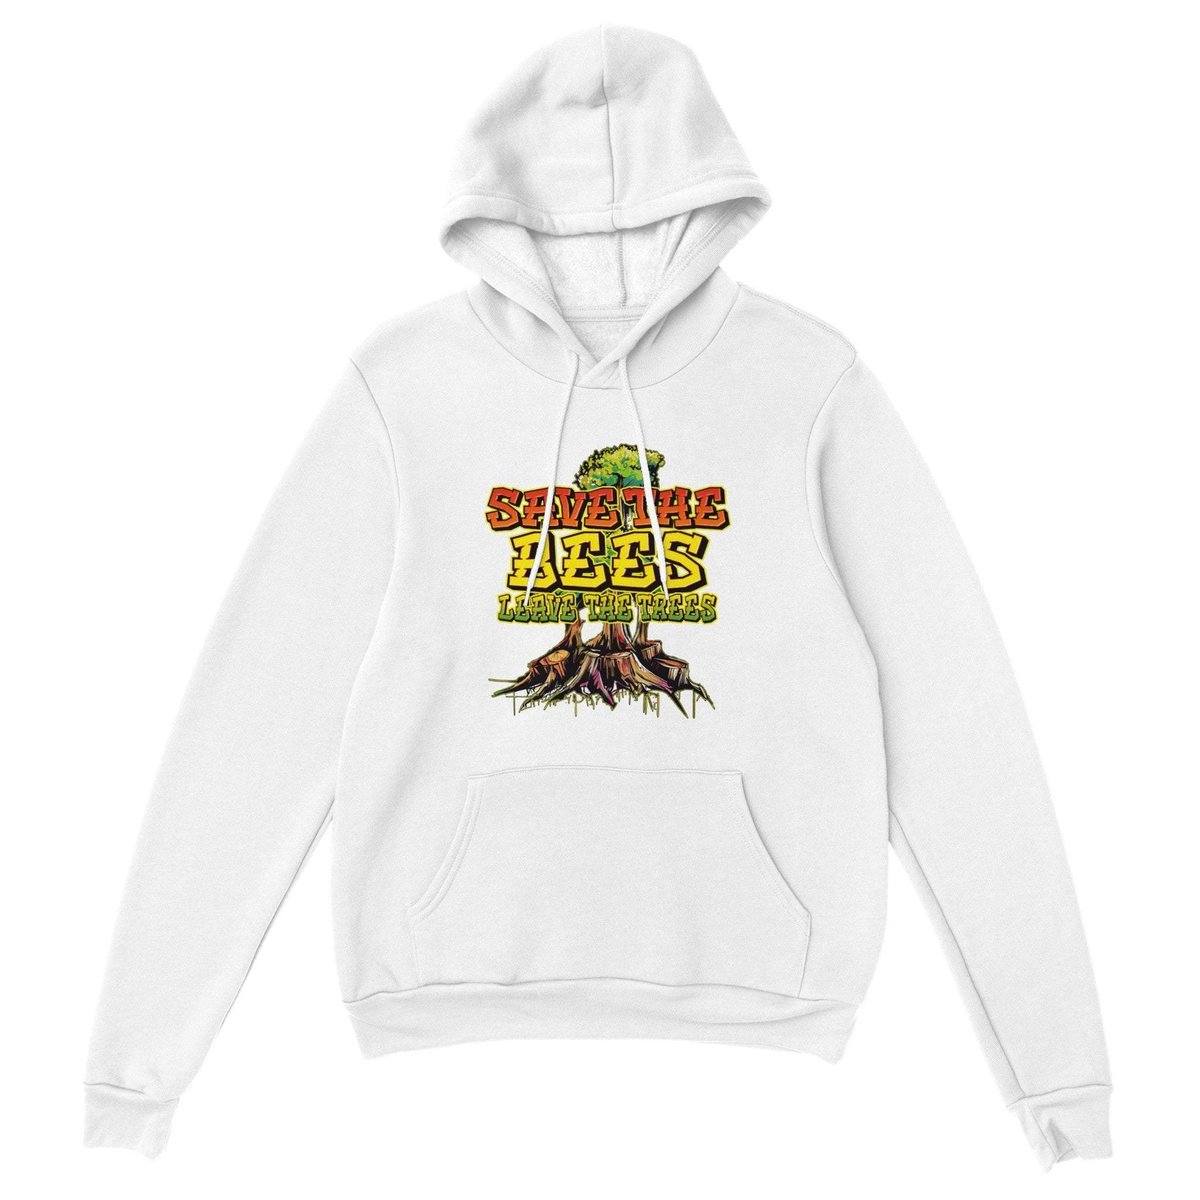 Save The Bees Hoodie - Leave The Trees - Stumps - Premium Unisex Pullover Hoodie Australia Online Color White / XS